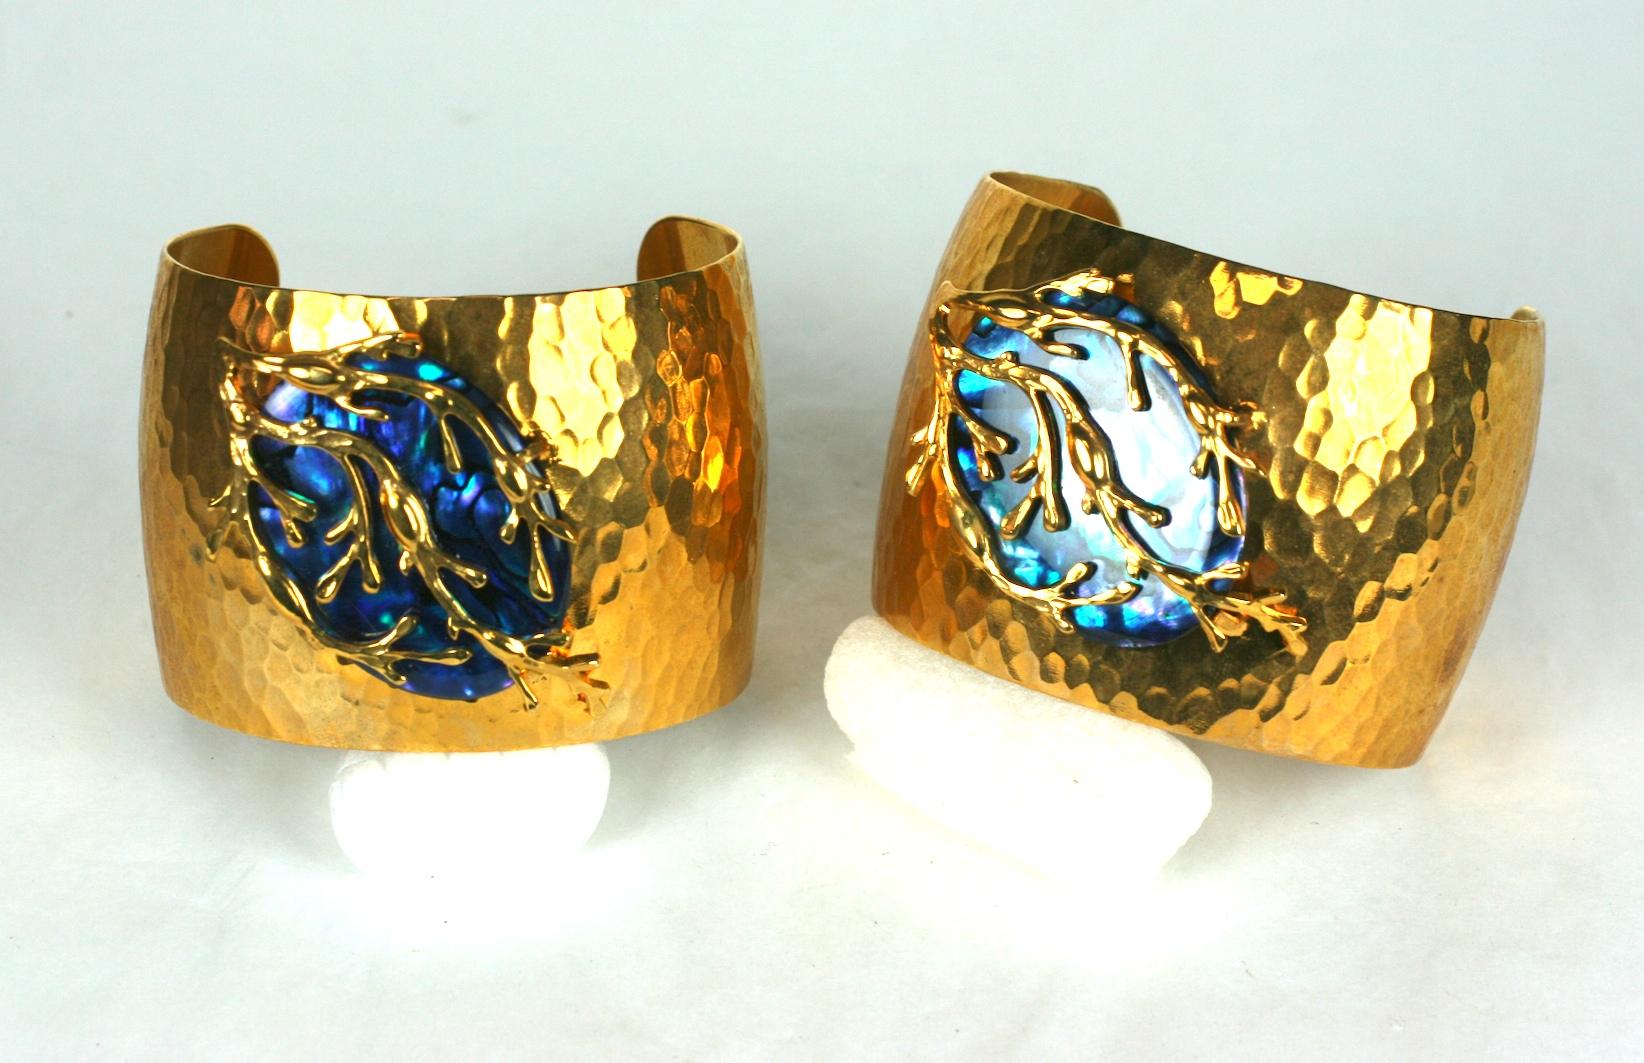 Mother of Pearl Seaweed Cuffs handmade in the Parisian studios of MWLC. Blue iridescent mother of pearl oval 